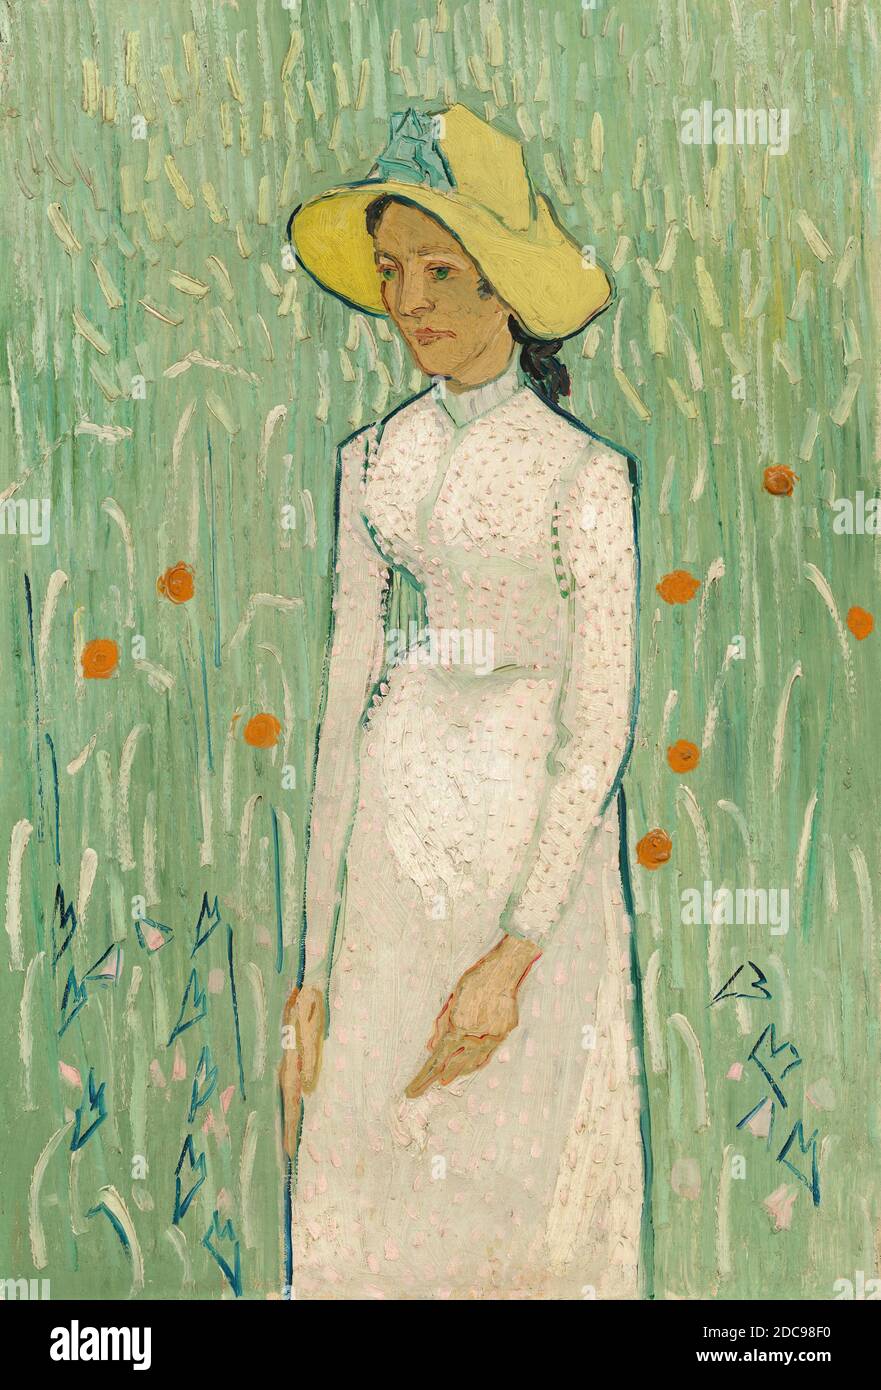 Vincent van Gogh, (artist), Dutch, 1853 - 1890, Girl in White, 1890, oil on canvas, overall: 66.7 x 45.8 cm (26 1/4 x 18 1/16 in.), framed: 96.2 x 73.7 cm (37 7/8 x 29 in Stock Photo